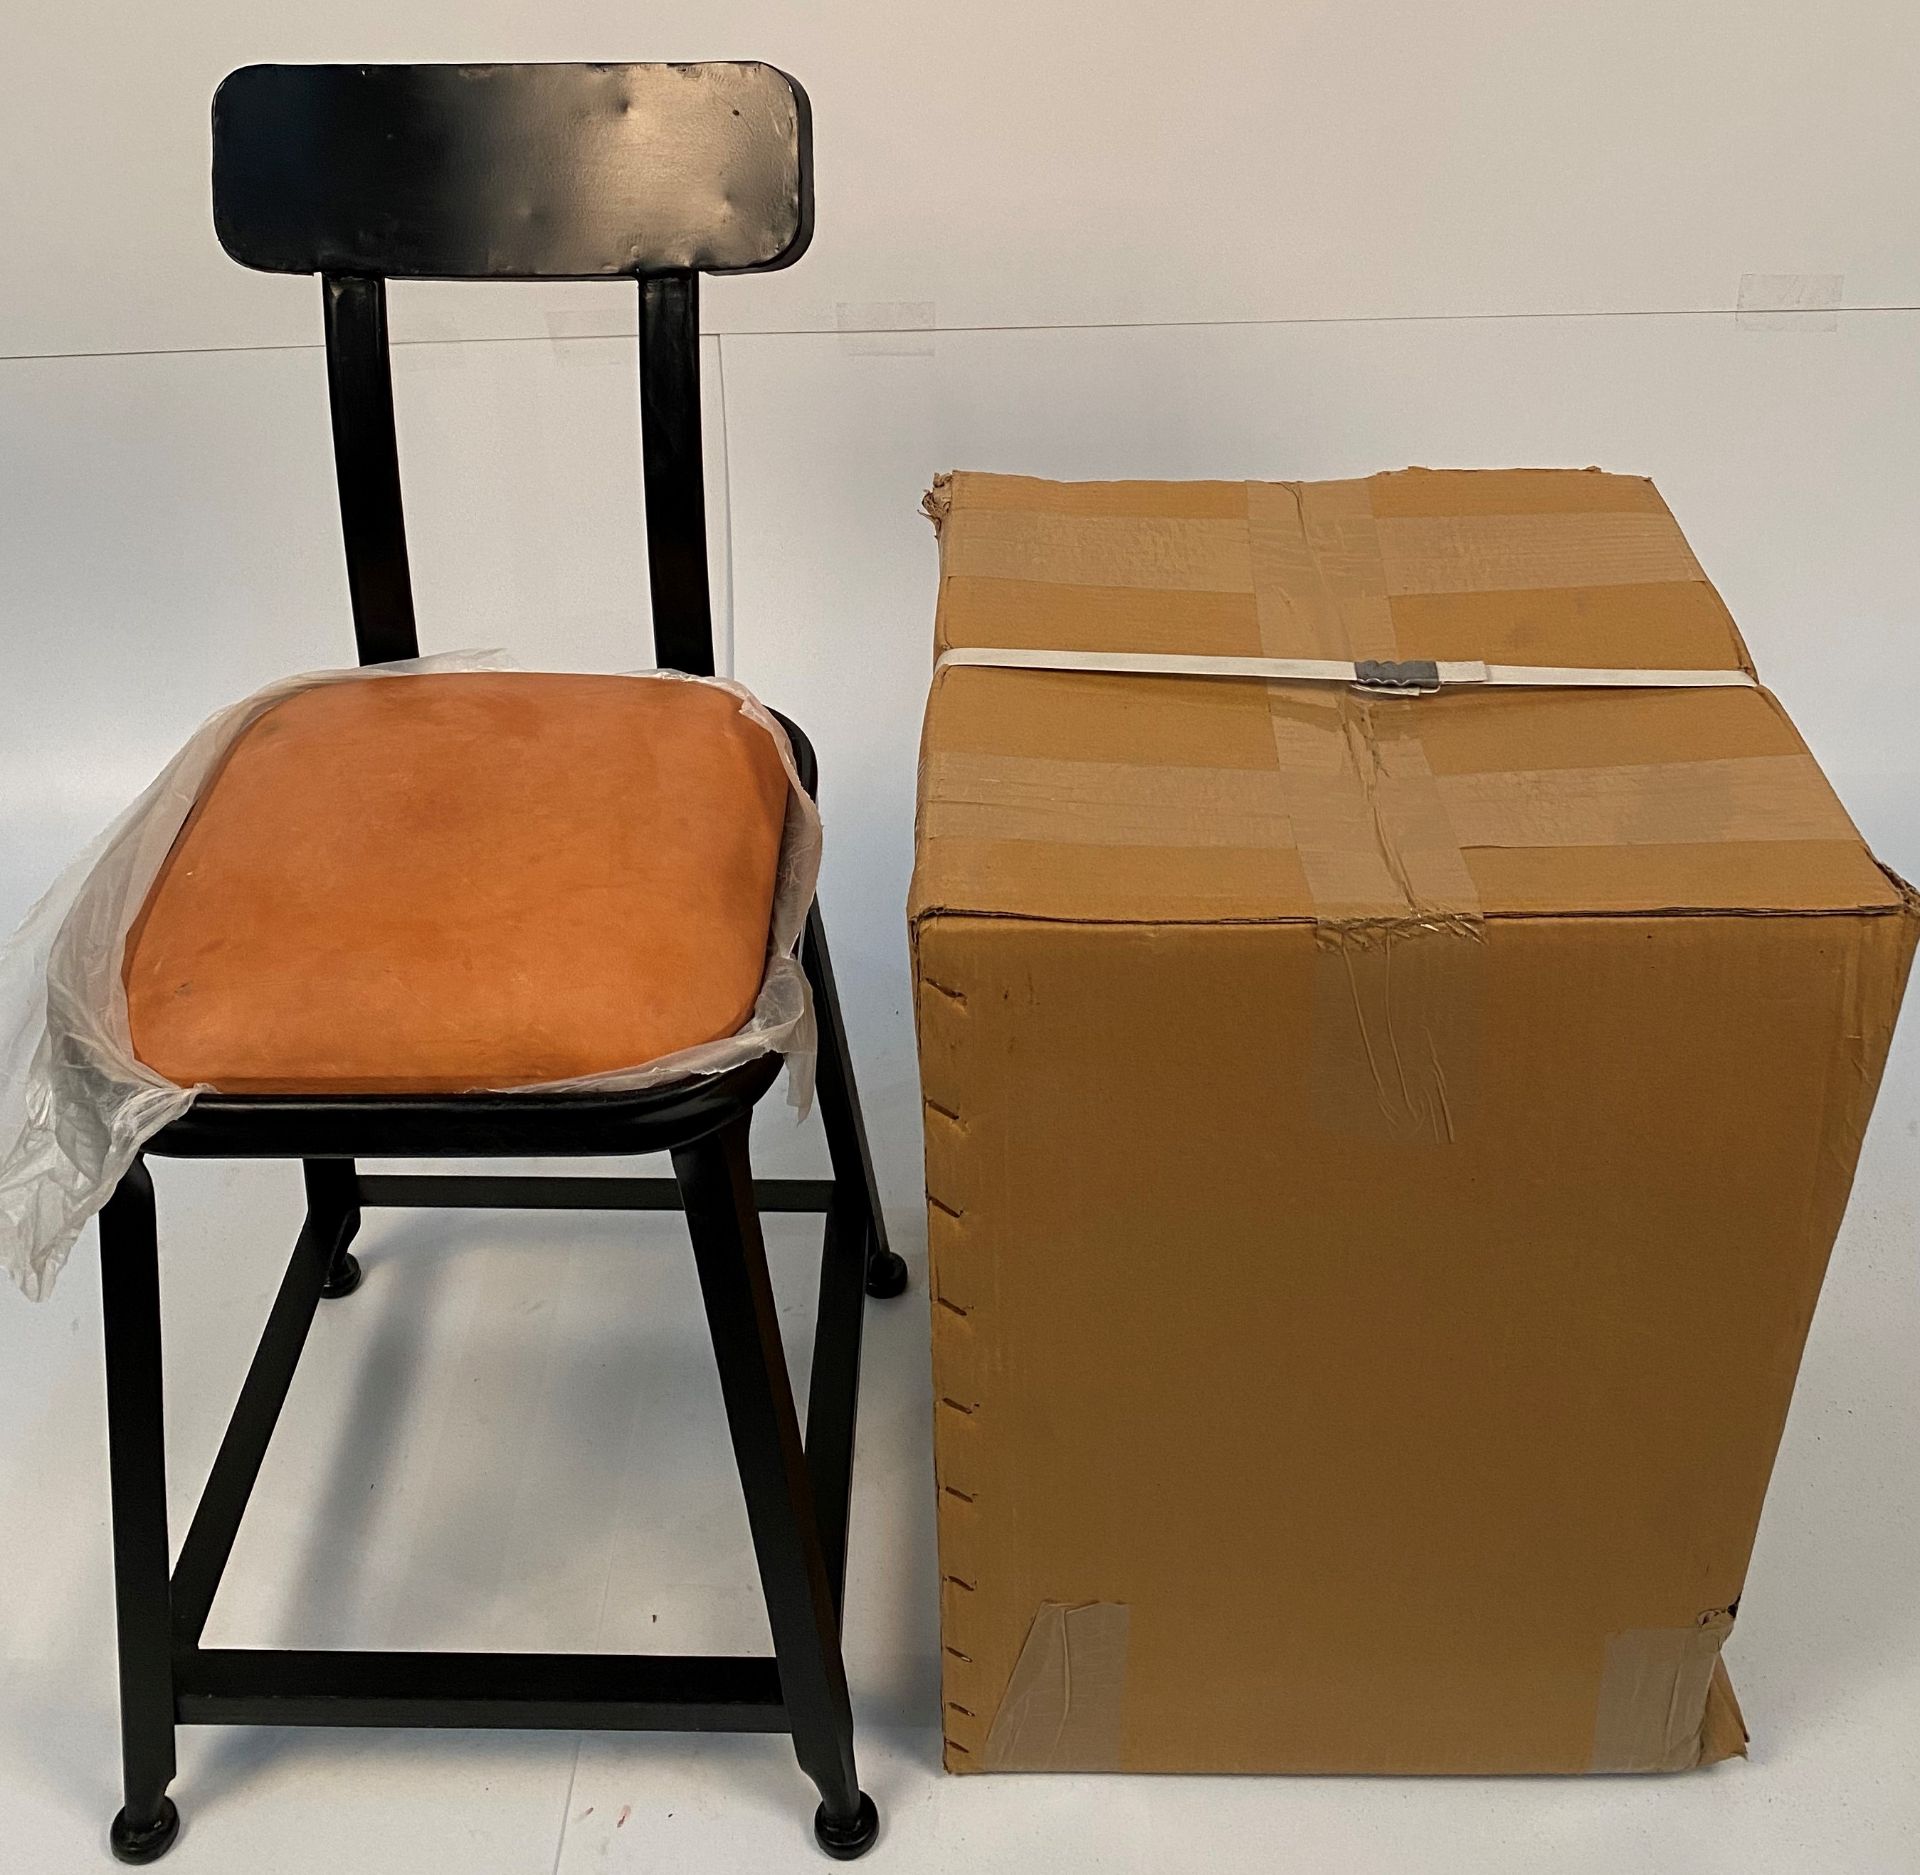 An Industrial UPH low stools with metal back - black metal frames